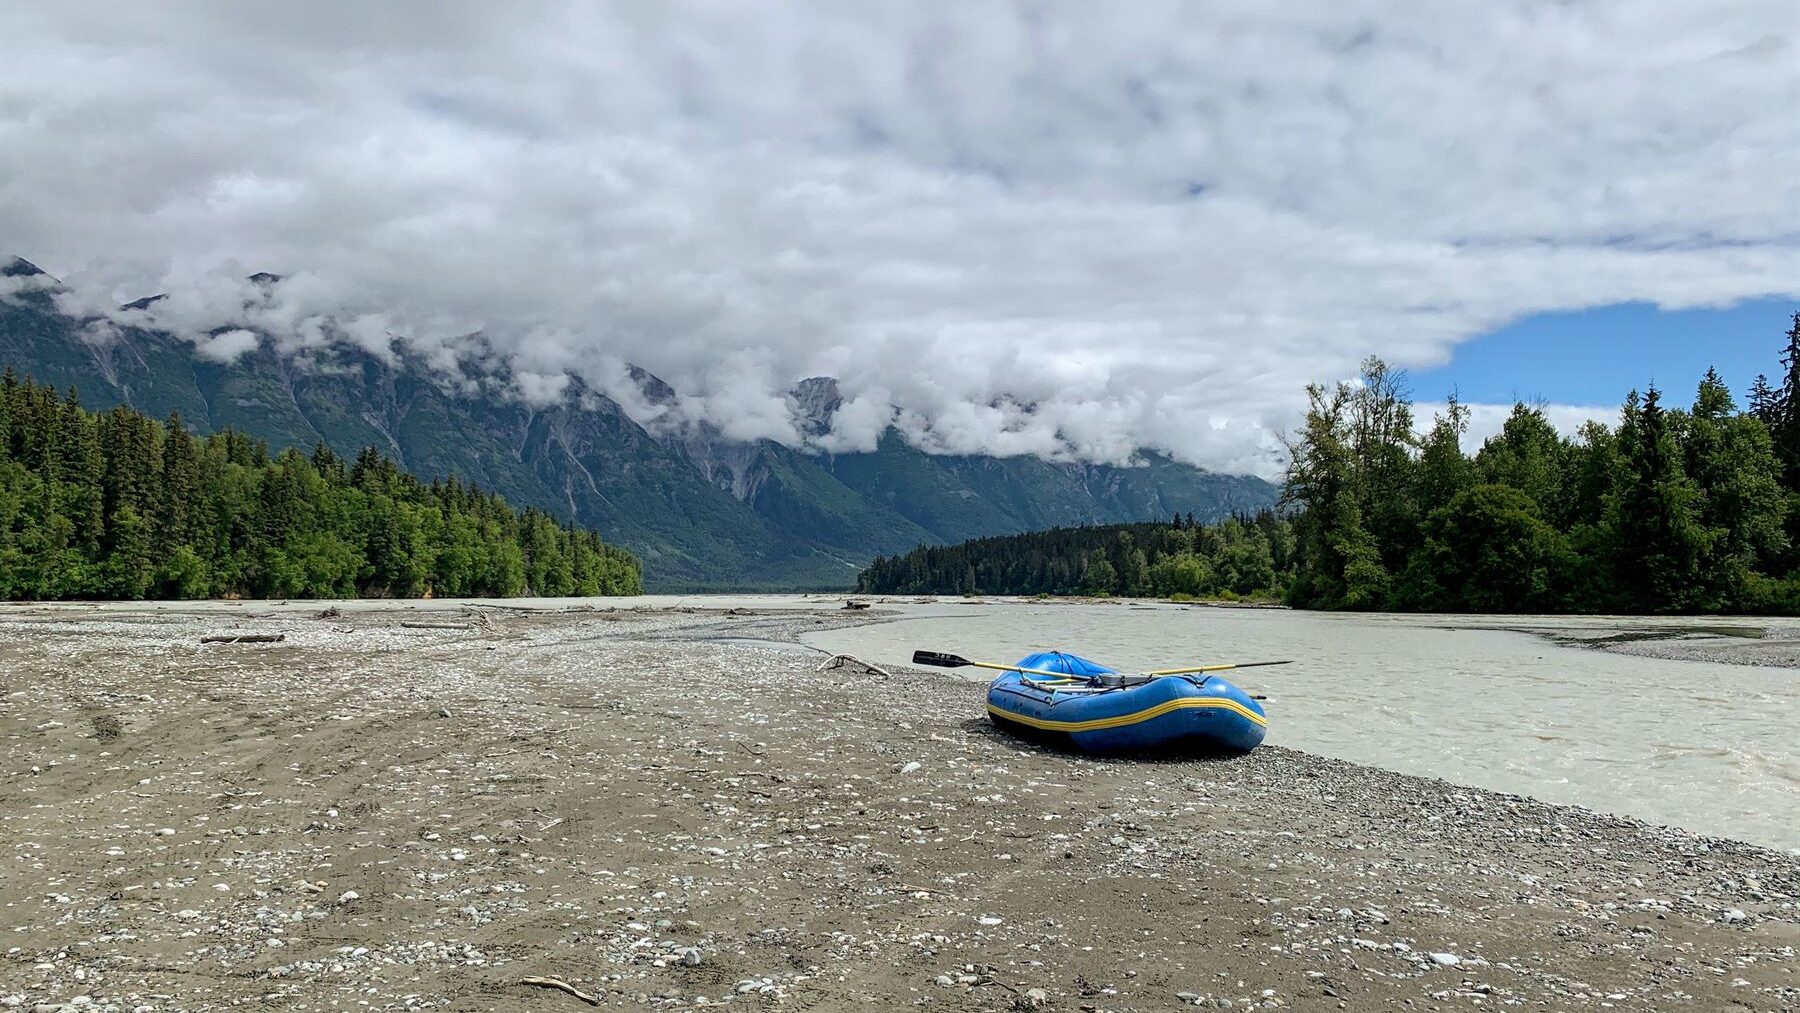 Dingy sitting beside a riverbed with forests and mountains in the distance